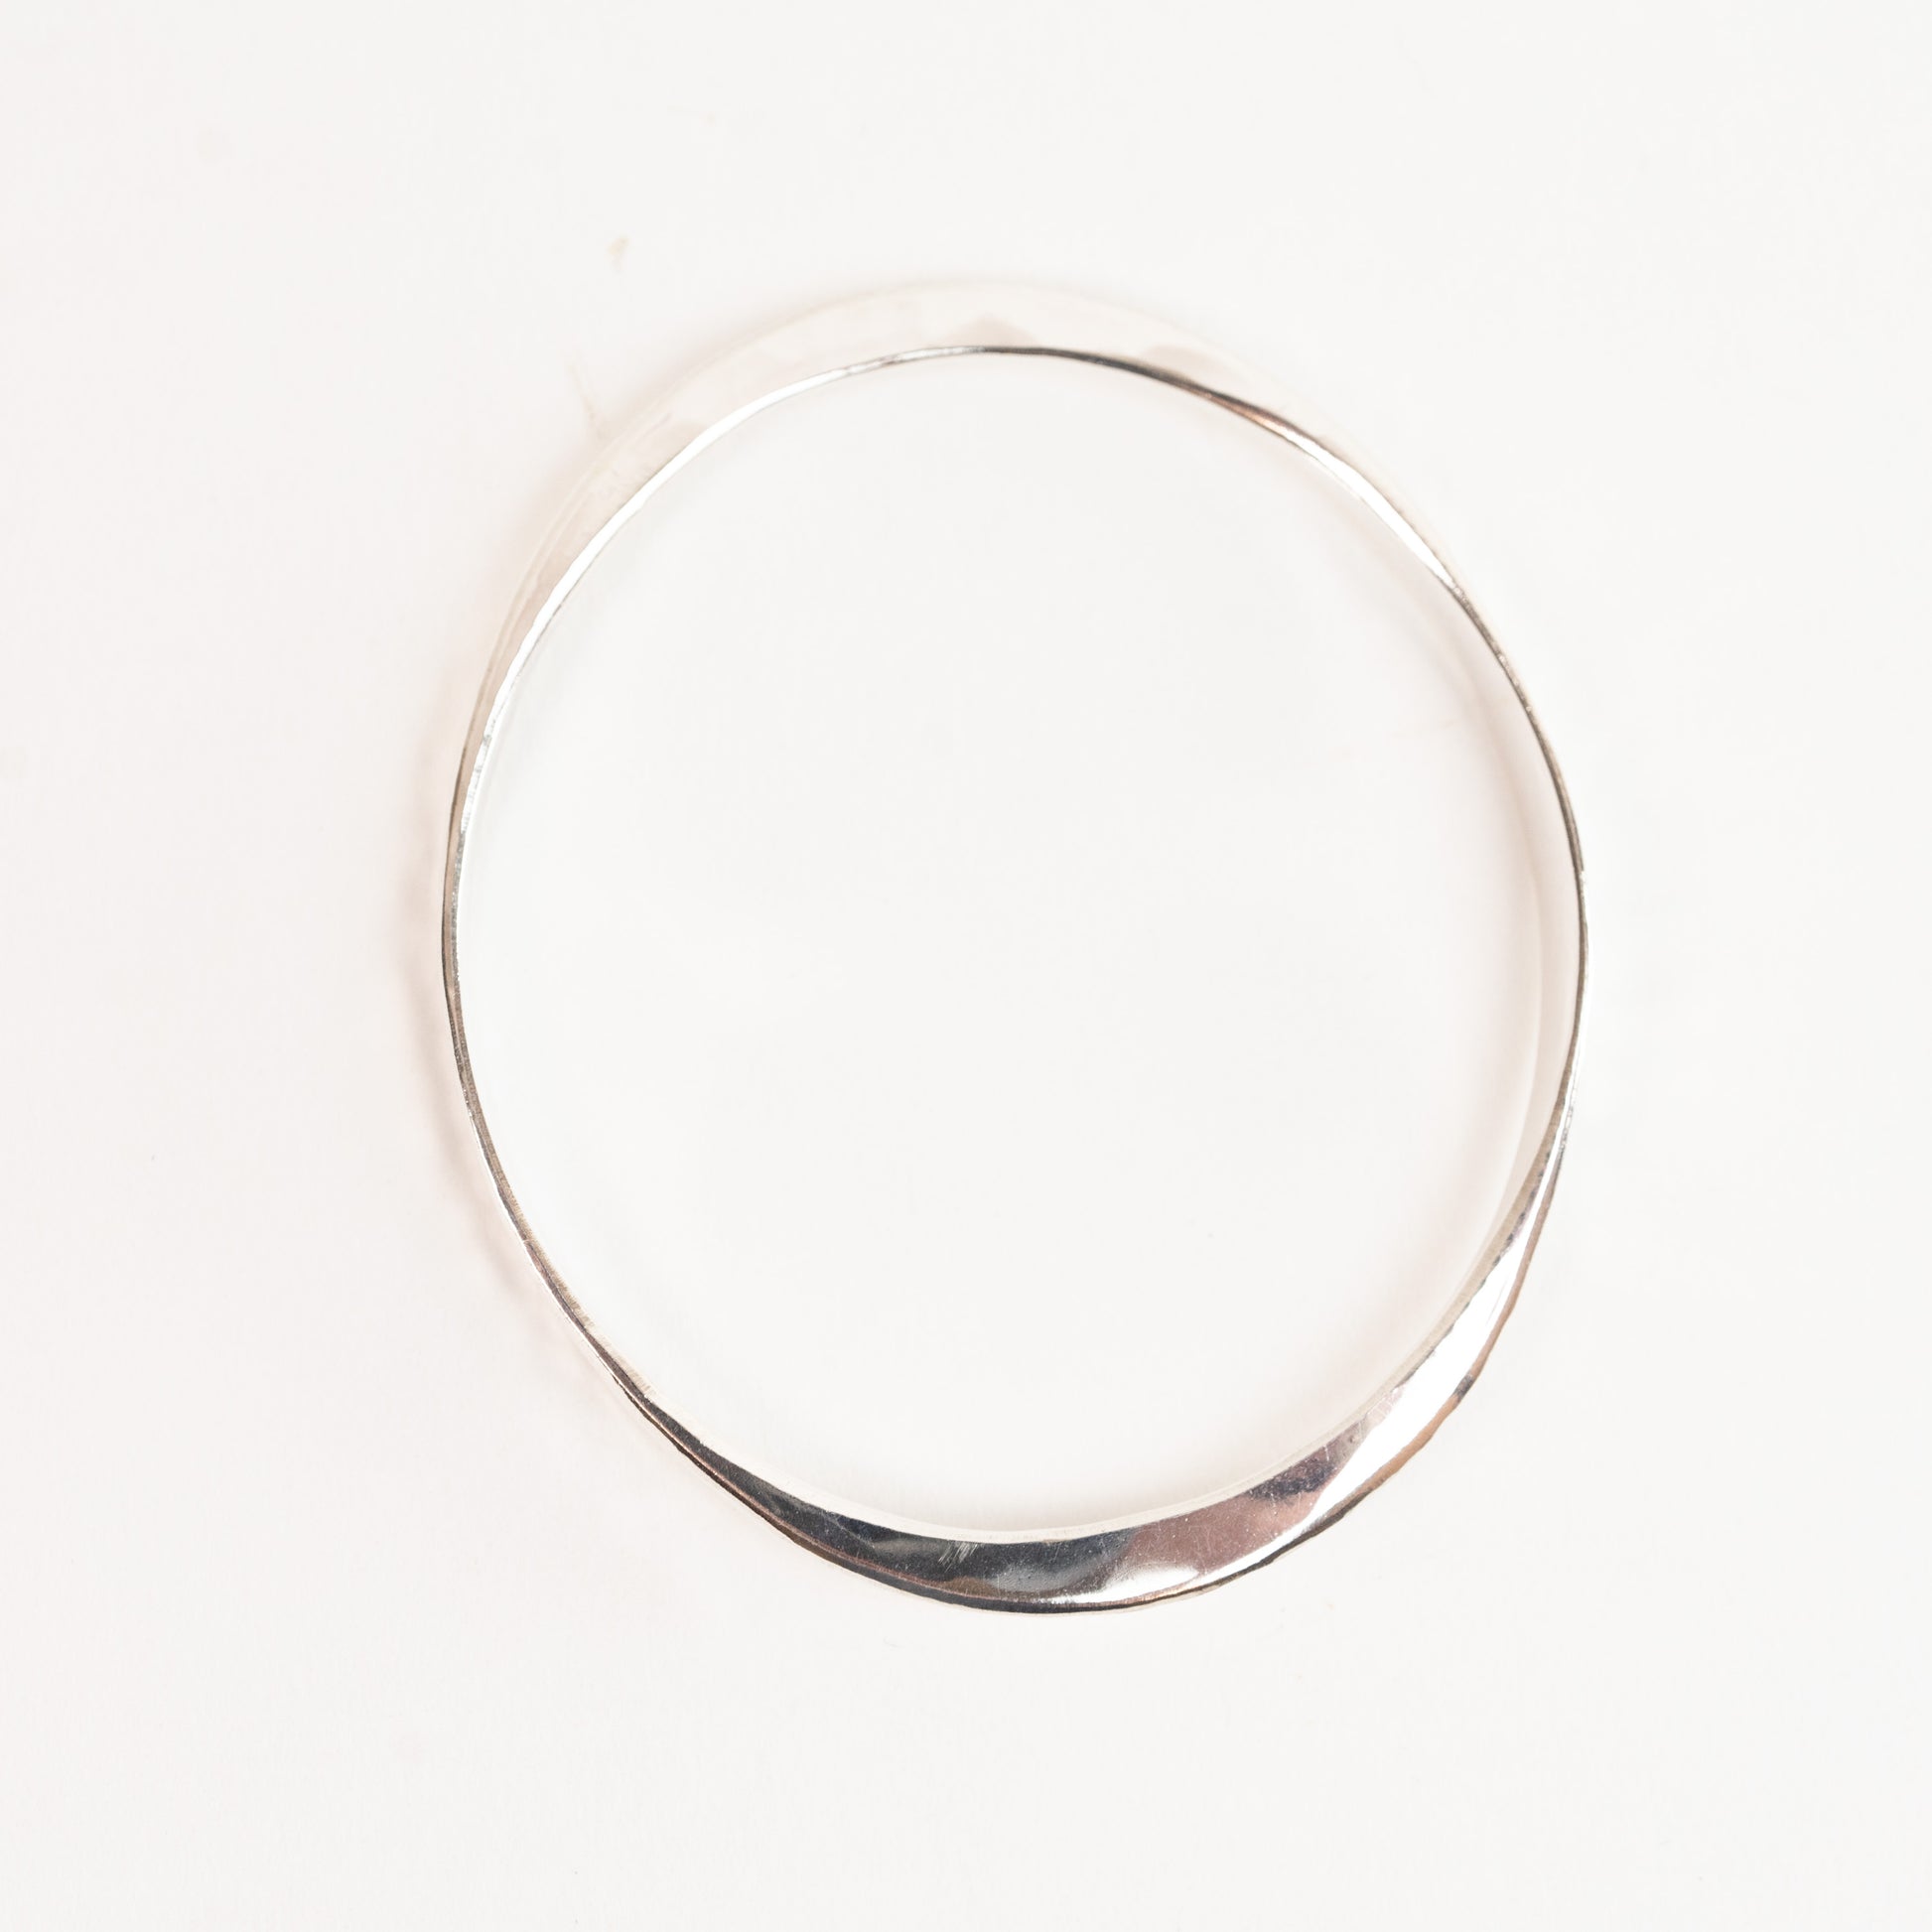 Bangle Bracelet - Sterling Silver - hand forged into an Oval - Heavy 8 gauge